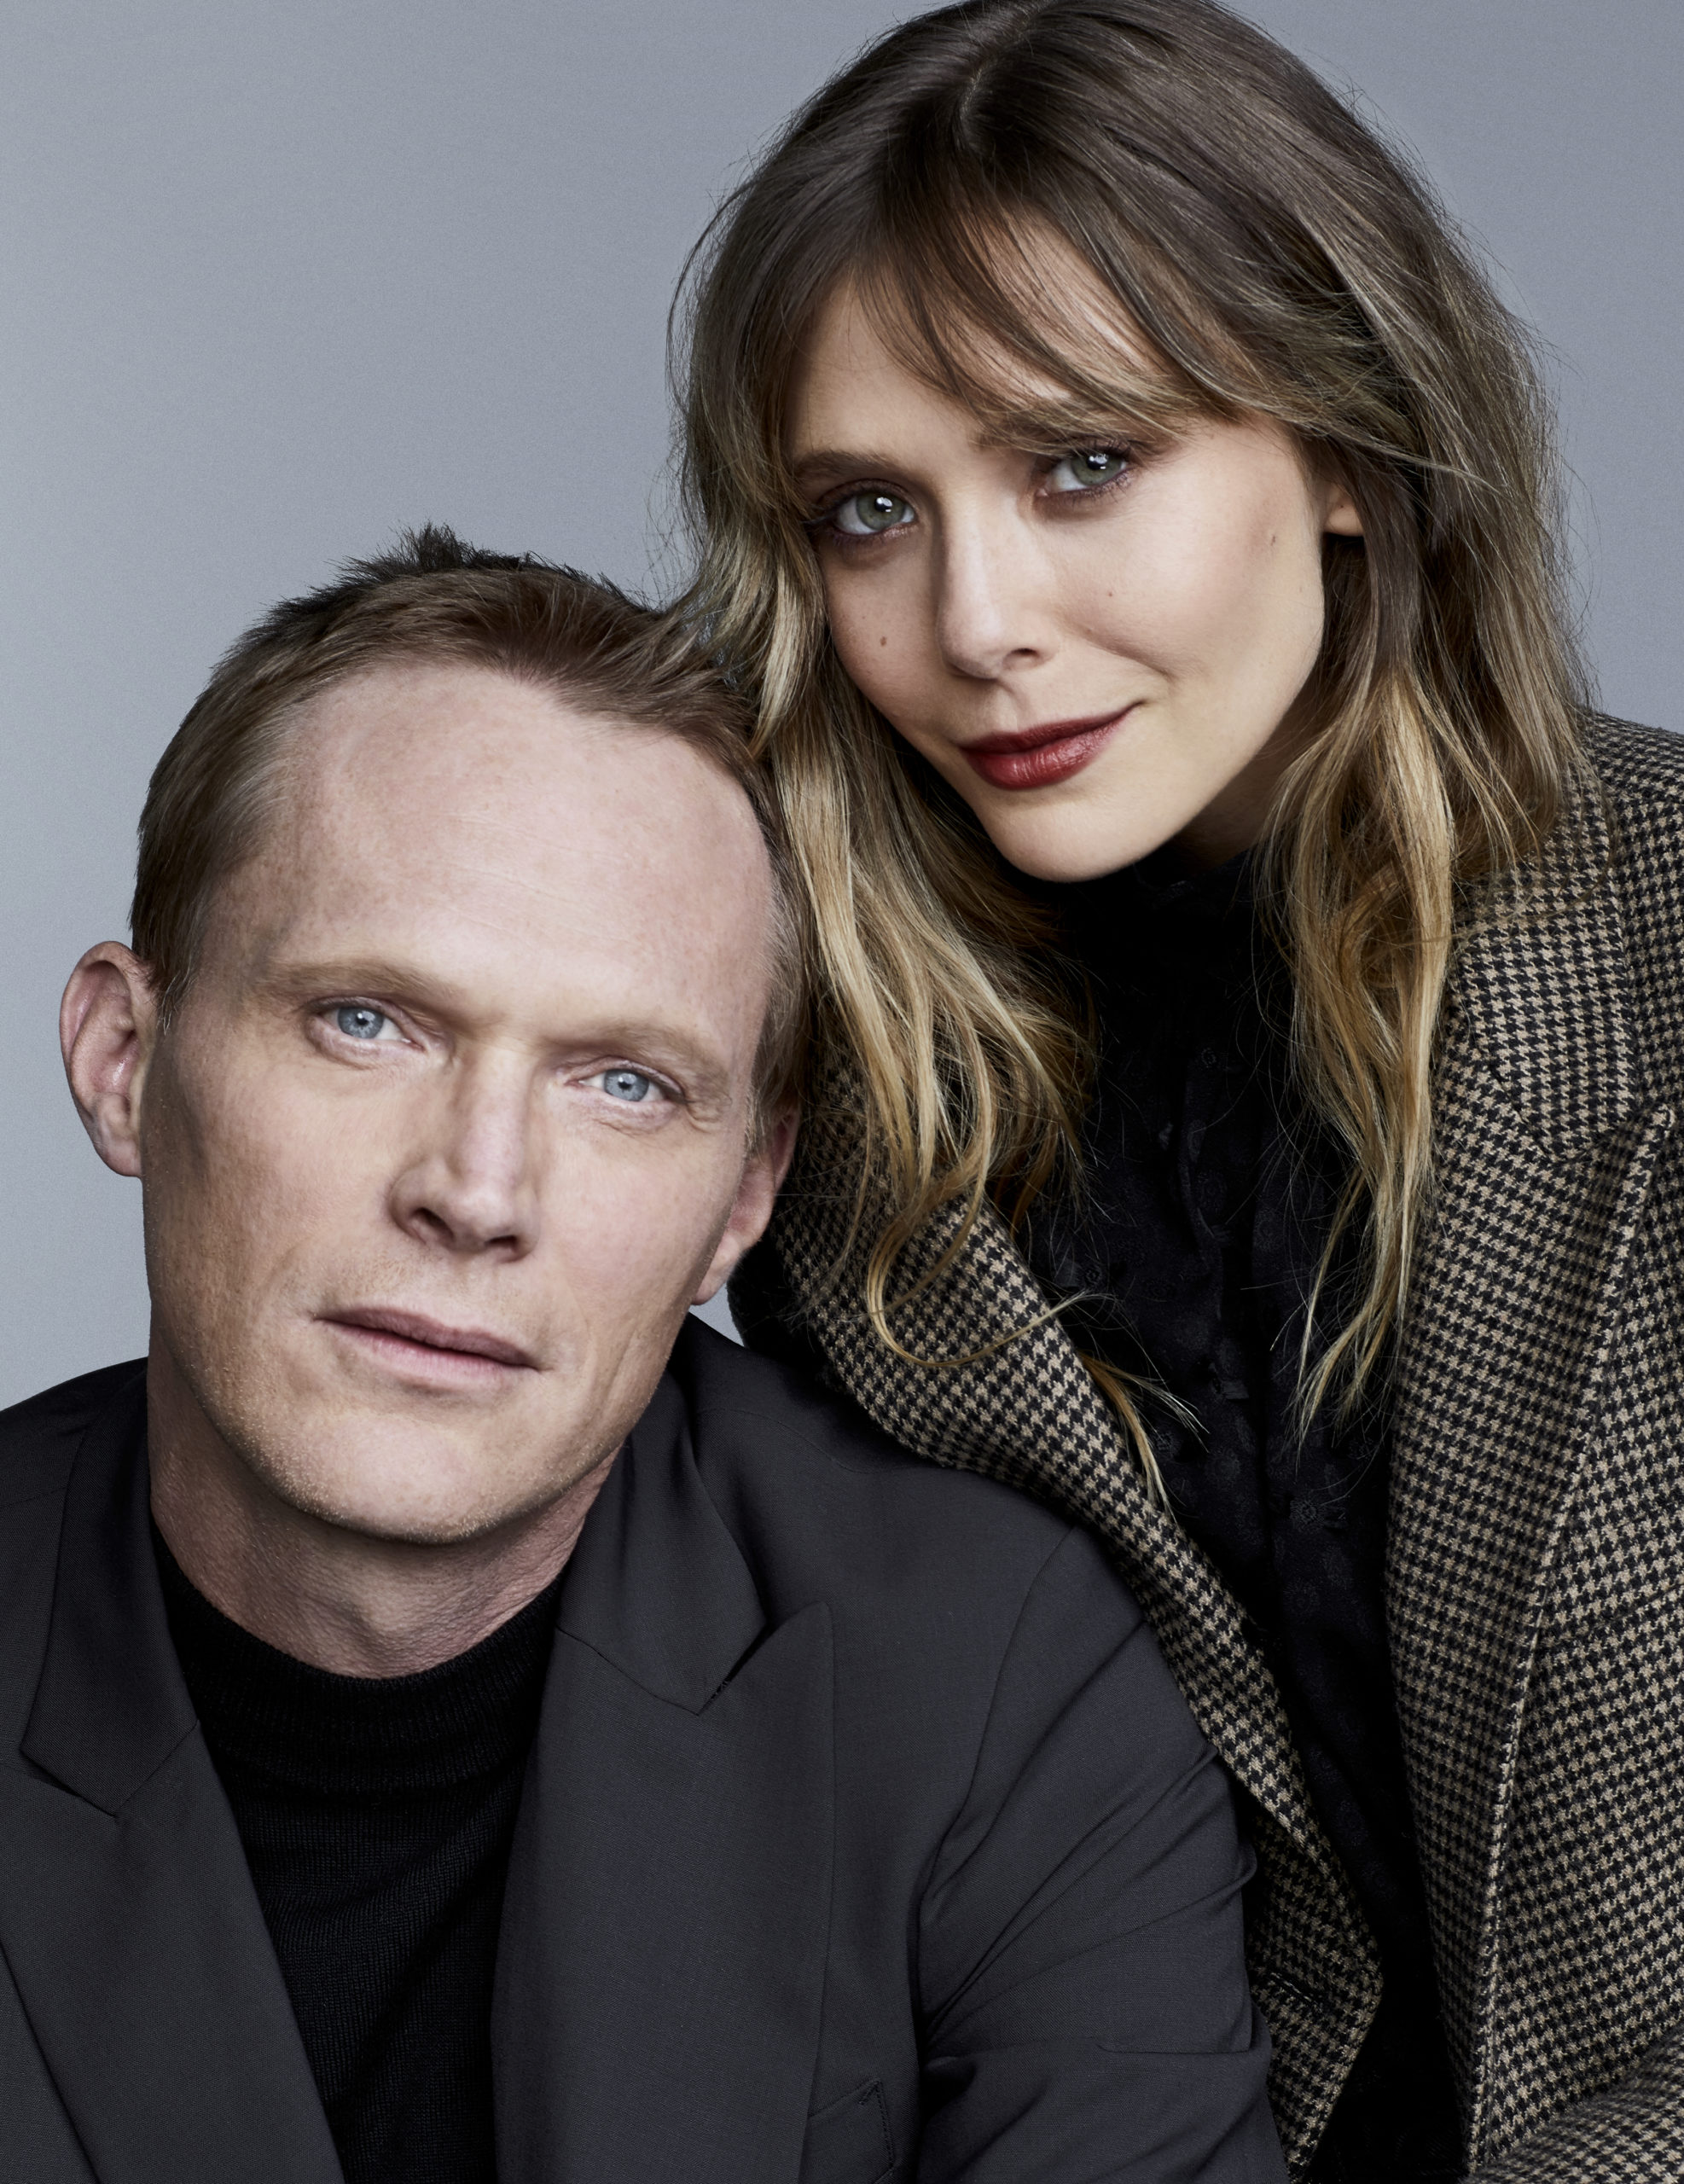 elizabeth Olsen And Paul Bettany Play The Newlywed Game